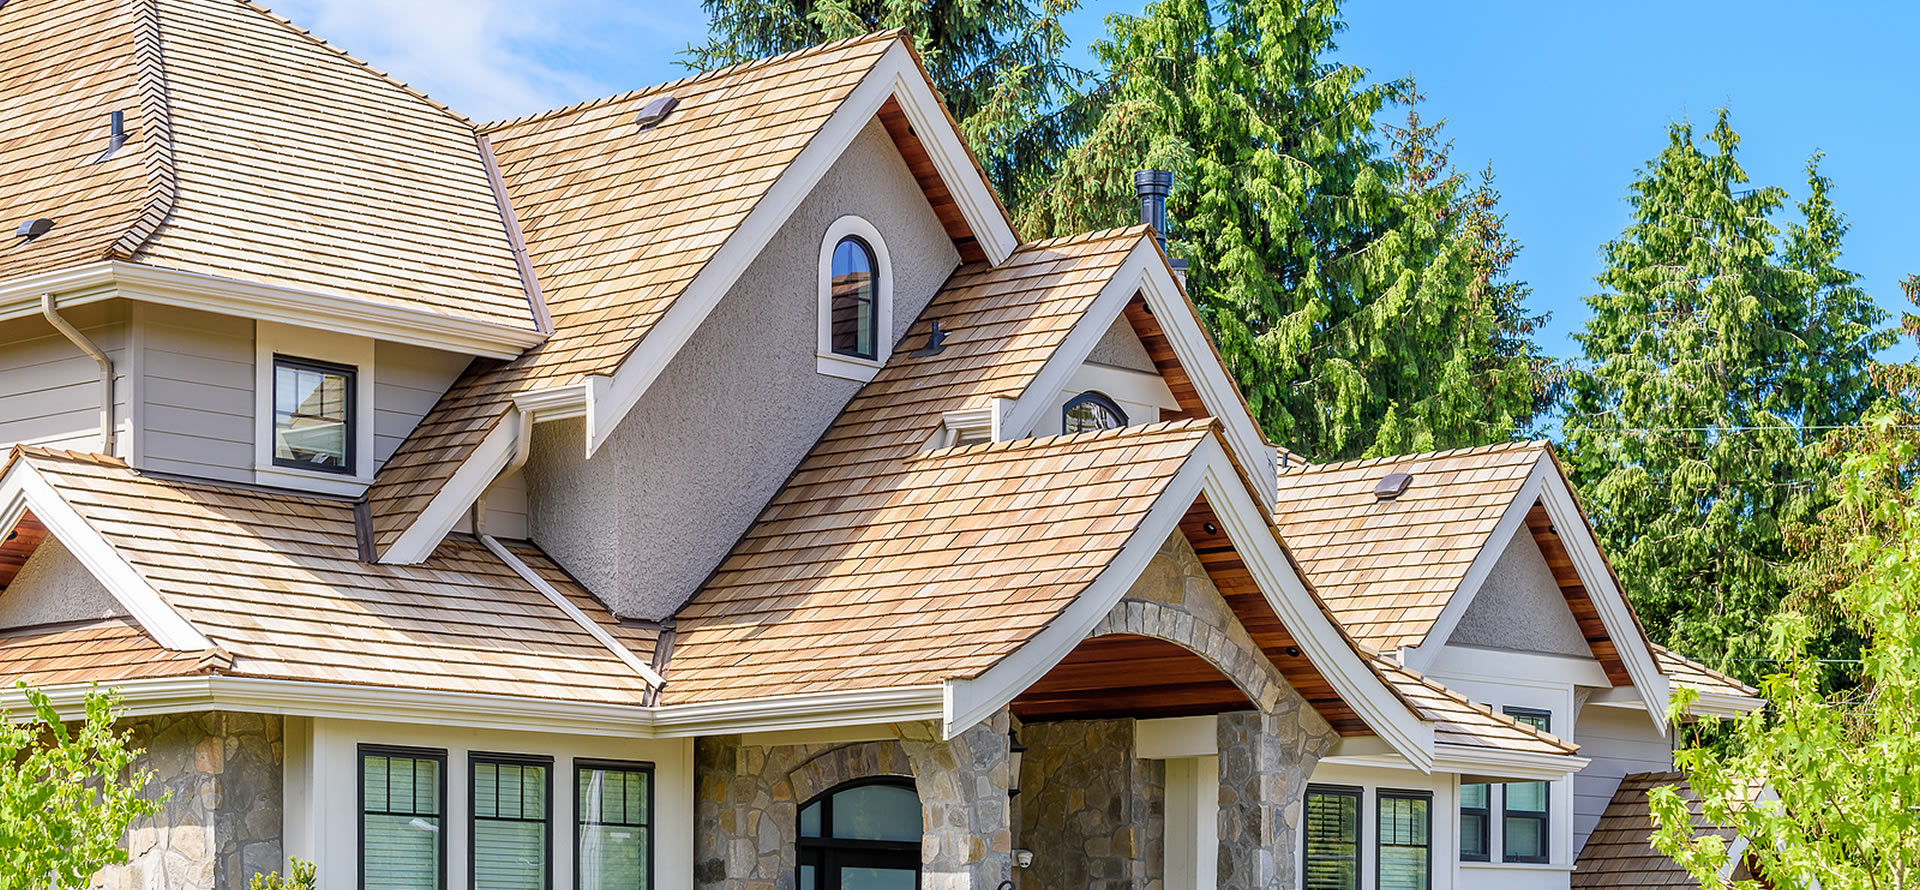 Tips to Avoid Roofing Scams